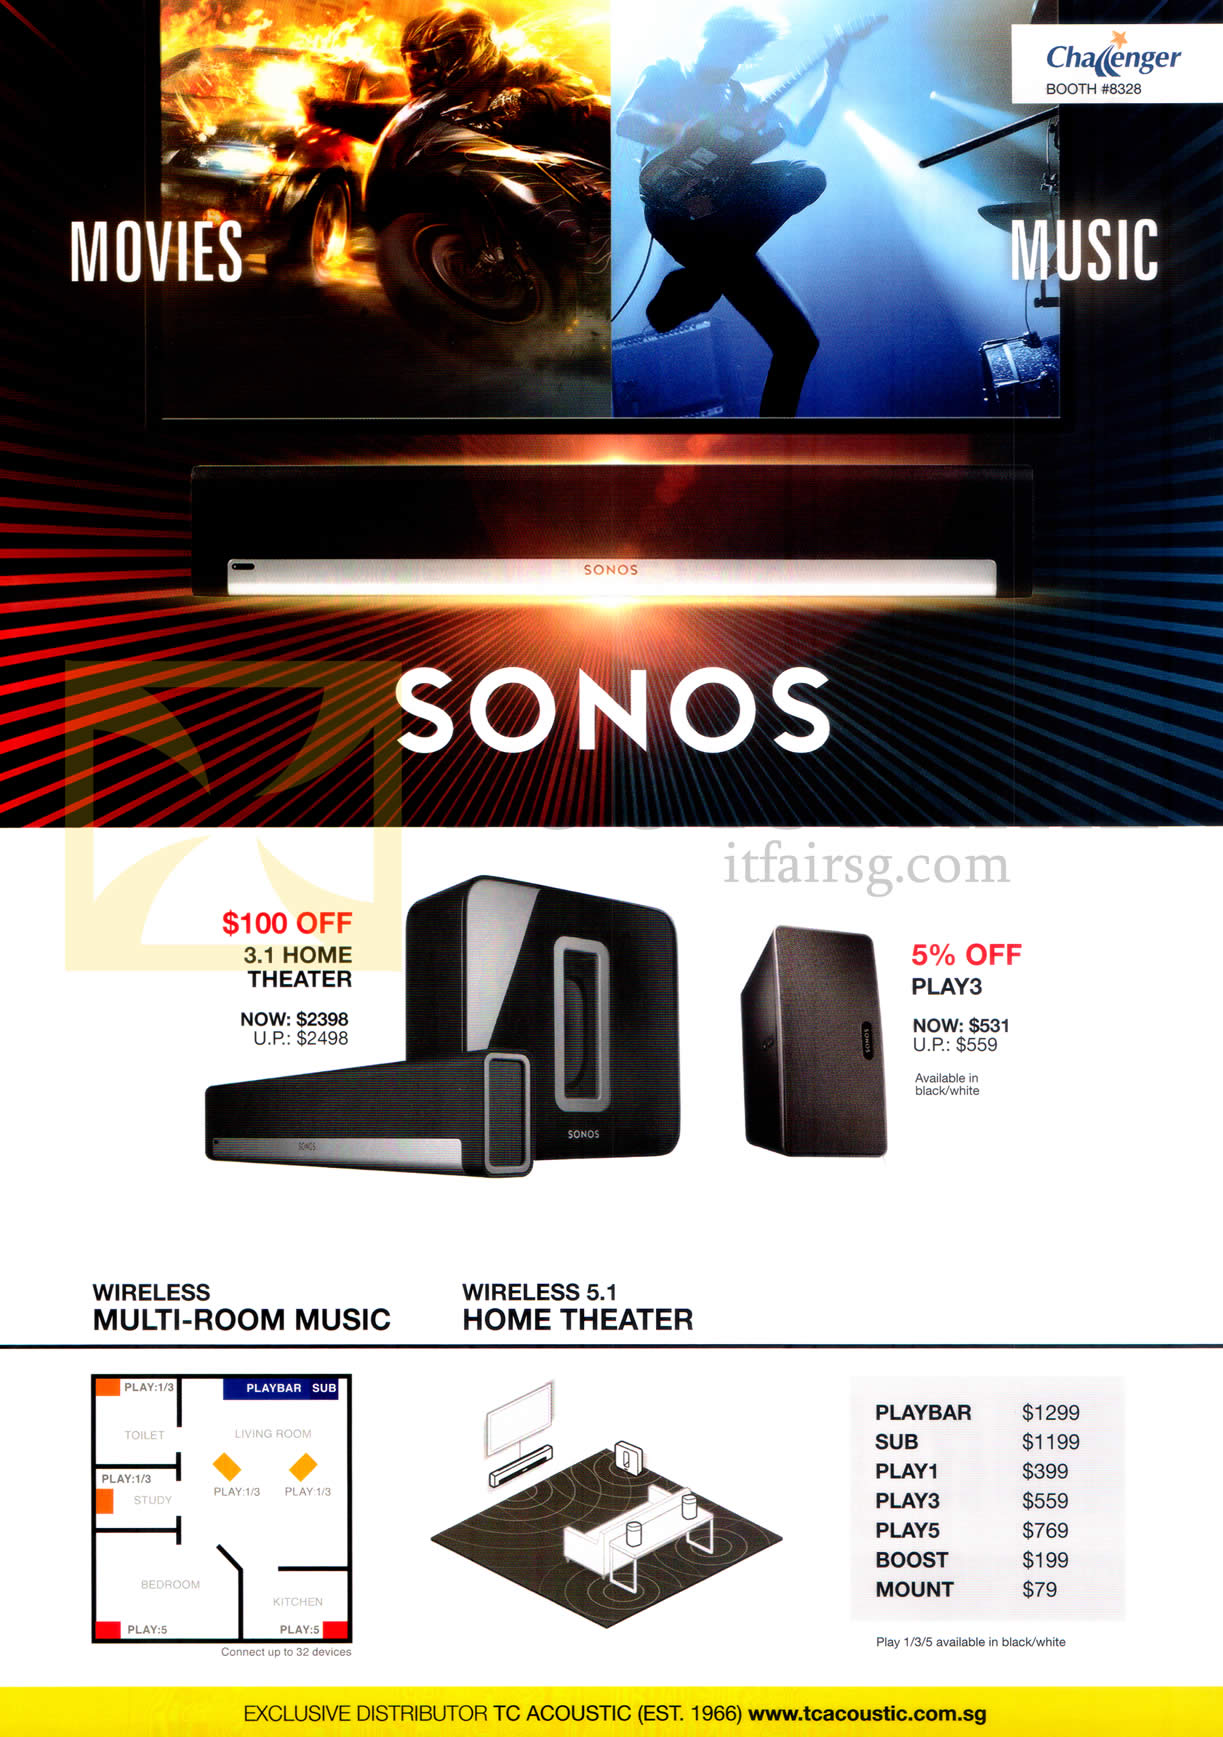 COMEX 2015 price list image brochure of Challenger Sonos Home Theatre System 3.1, Play 3, Wireless Multi-Room Music, Wireless 5.1 Home Theatre